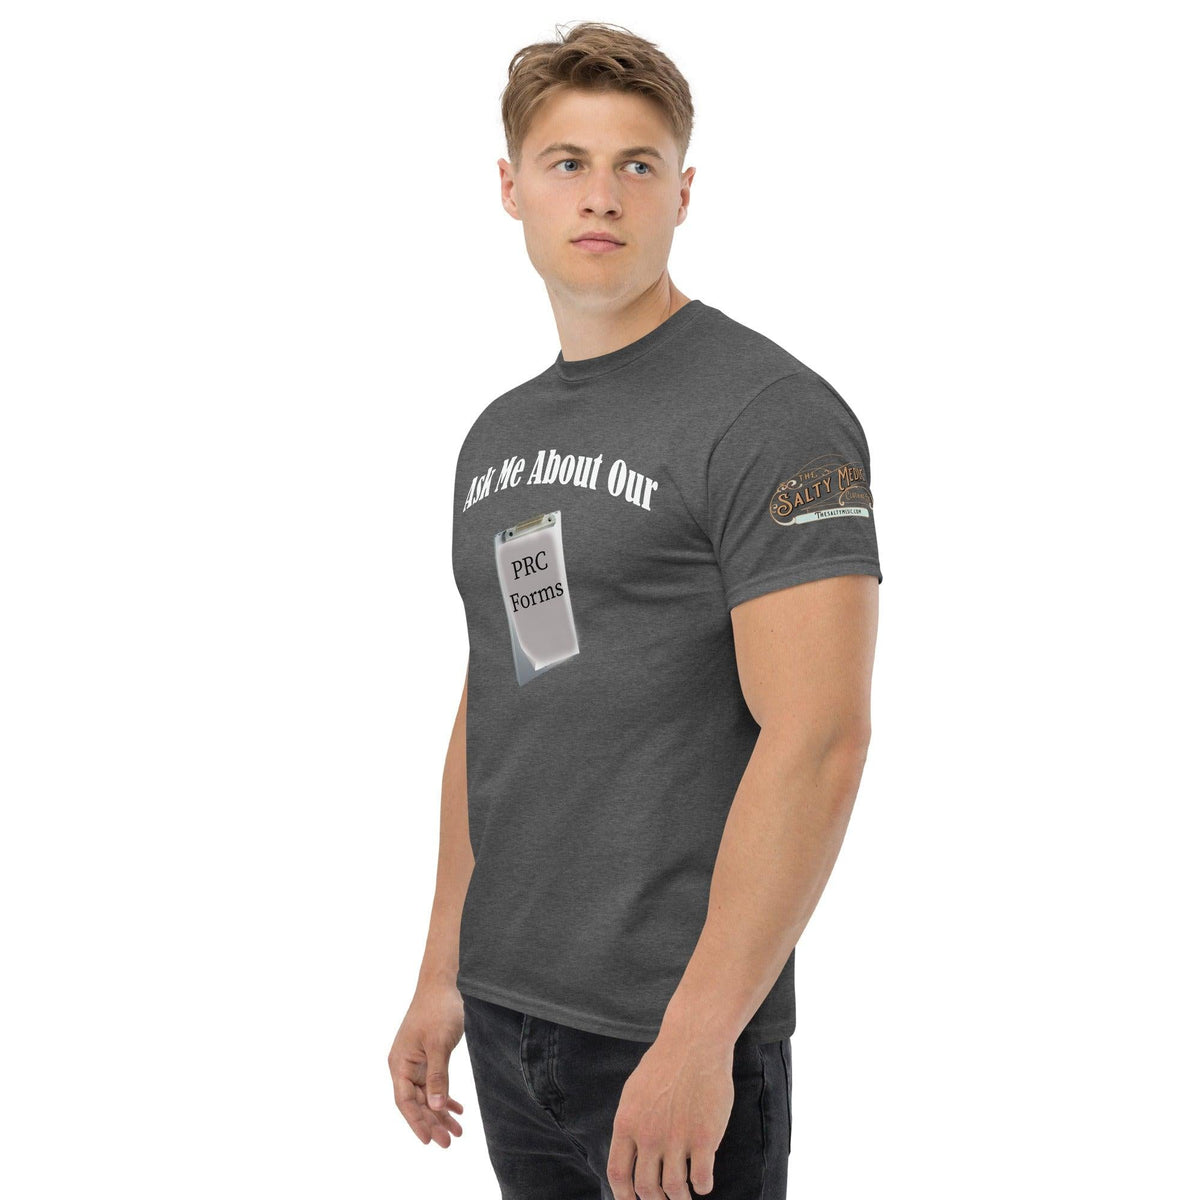 Ask me about our PRC forms Men's classic tee - Salty Medic Clothing Co.